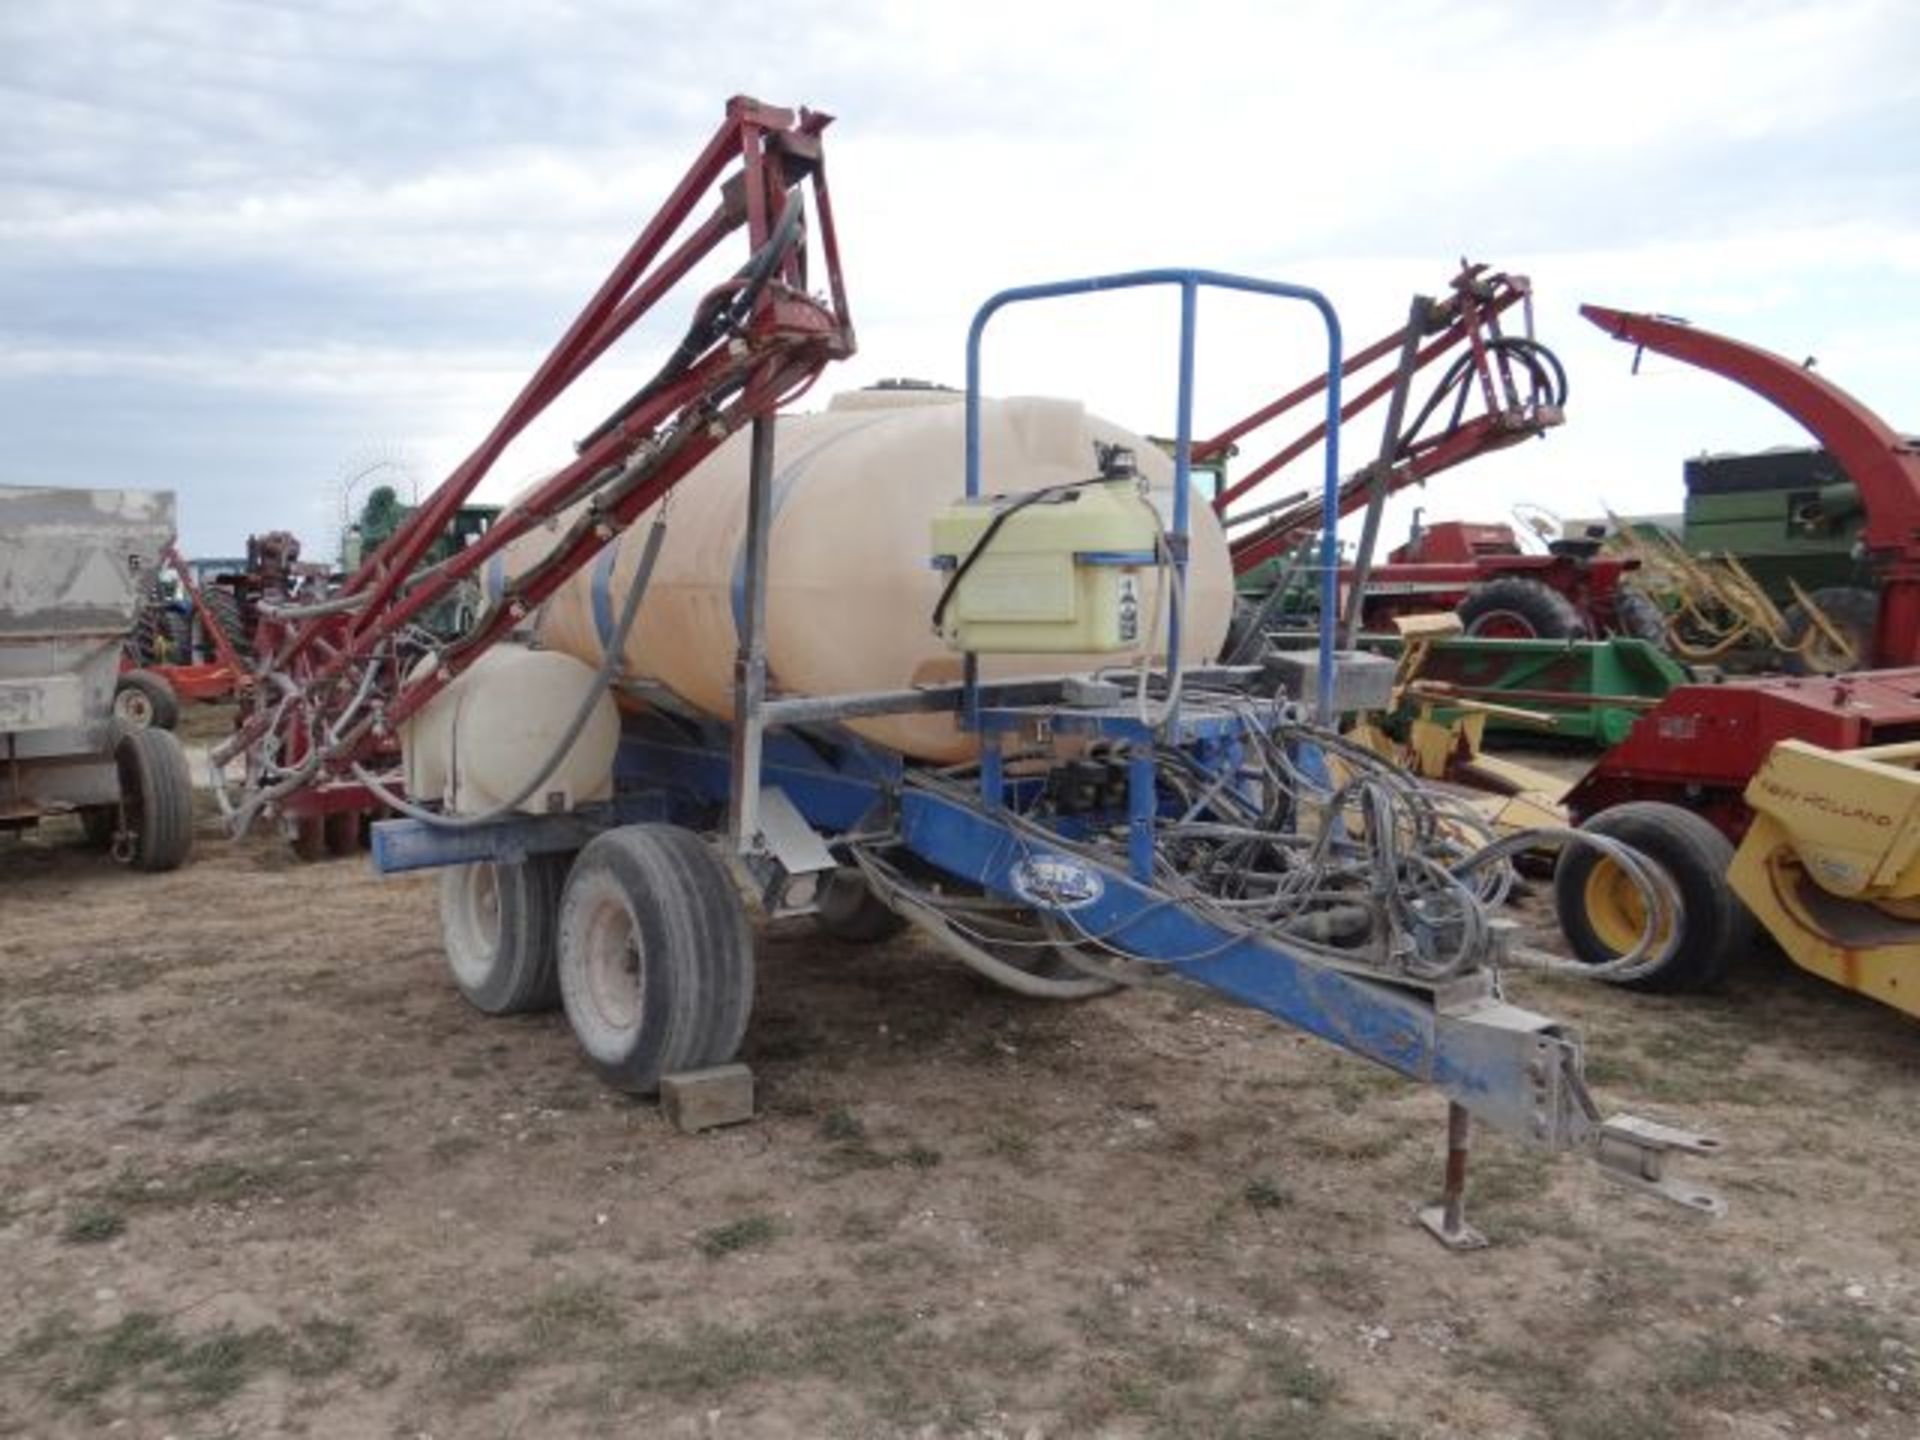 Broyhill Sprayer 60' Booms, 700 Gallon Tank, Raven 440 Controller and Manuals in the Shed - Image 2 of 3